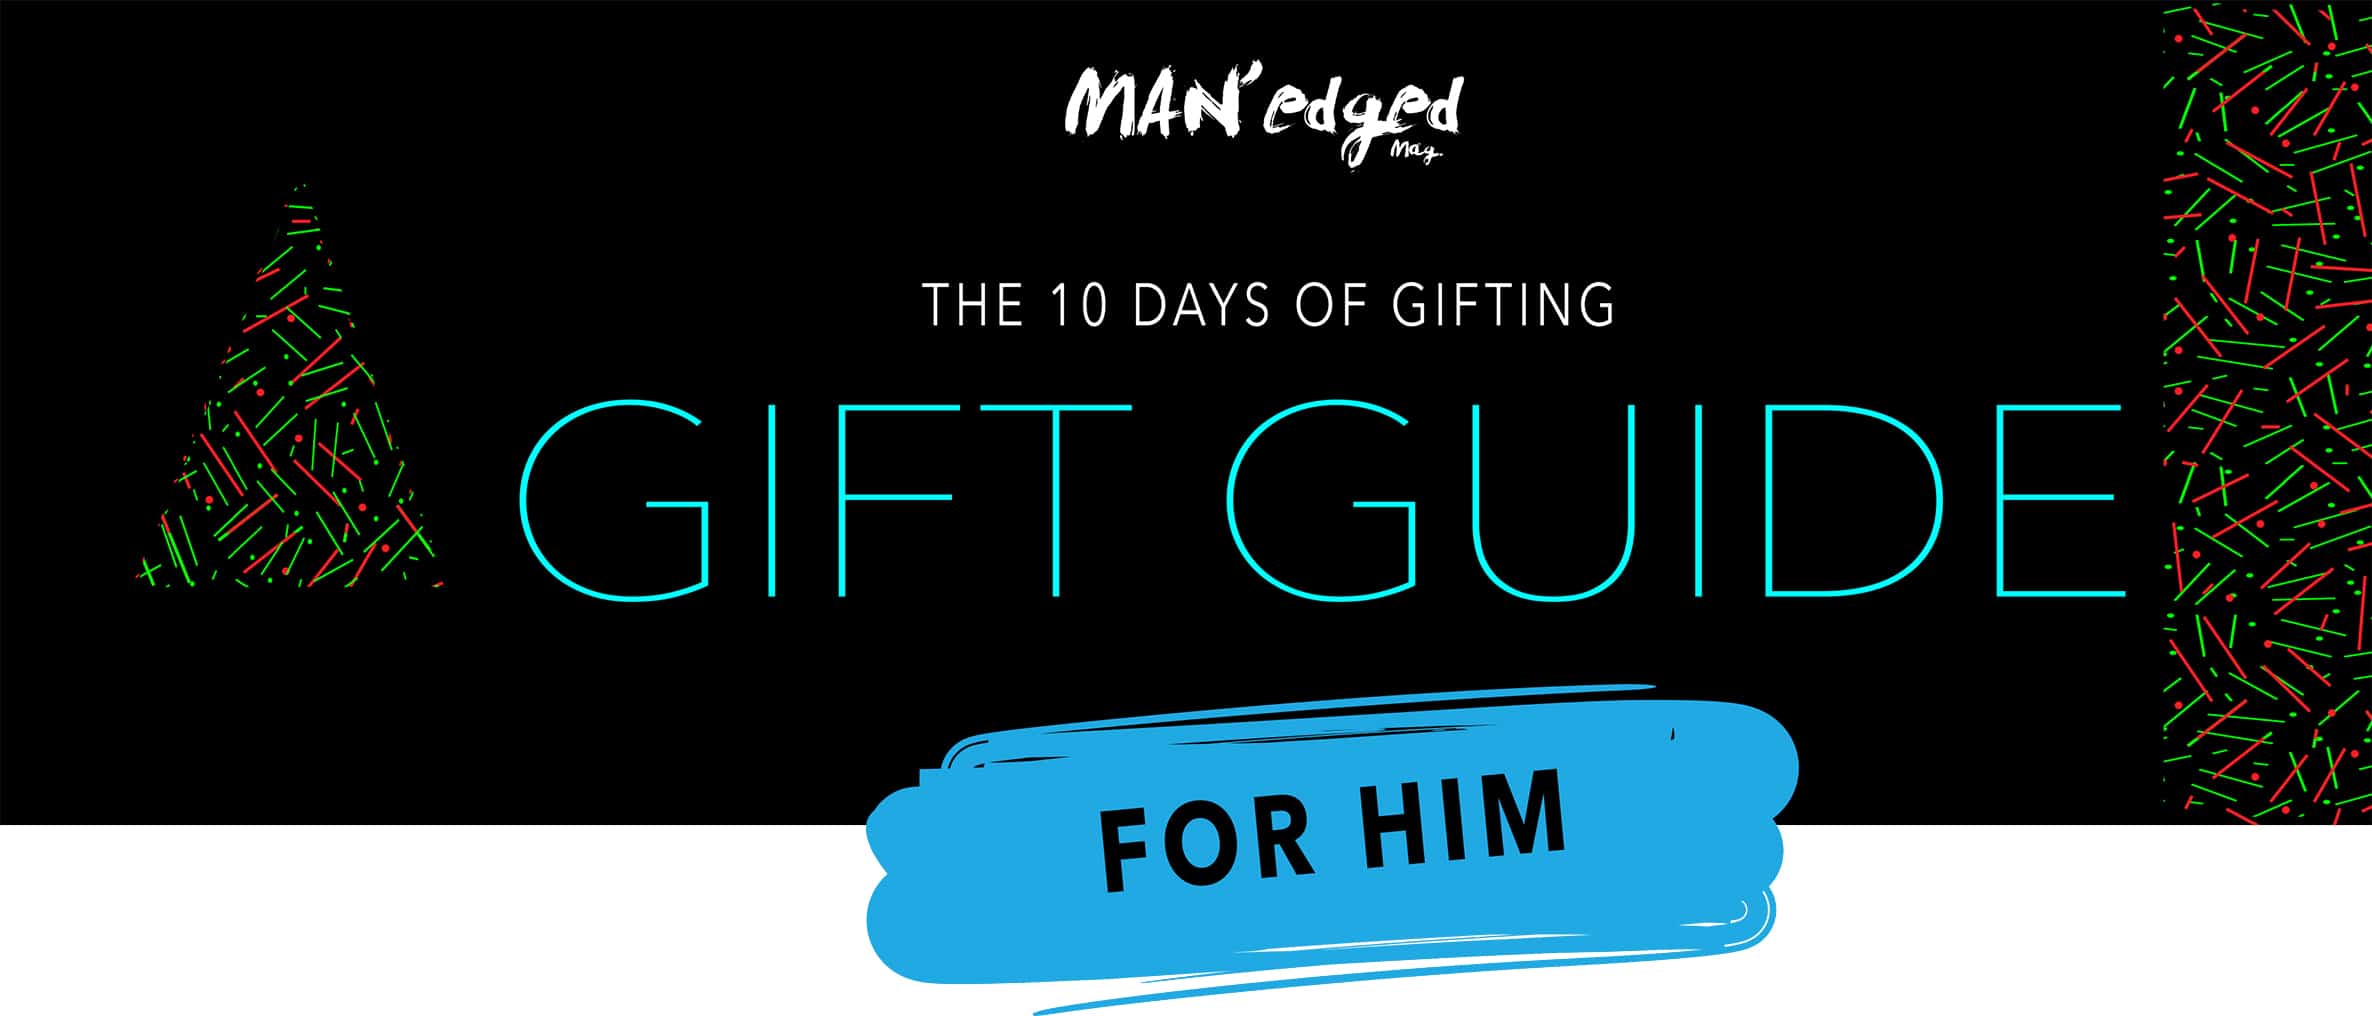 men's gift guide, ken wroy, underwear, men's gift guide, control sector, button up shirt,men's gift guide, control sector, shirt, michael william g, editor's note, letter from editor, man'edged.com, man'edged.com magazine, manedged magazine, MAN'edged magazine, MAN'edged mag, menswear, nyc, new york city, men's fashion, men's style, style, men's look, camel wool coats, camel, wool, coat, this or that, holiday, holiday gift, holiday gift guide, gift, gifting, mens gift guide, guide, gift guide, holiday gift guide, rochambeau nyc, rochambeau